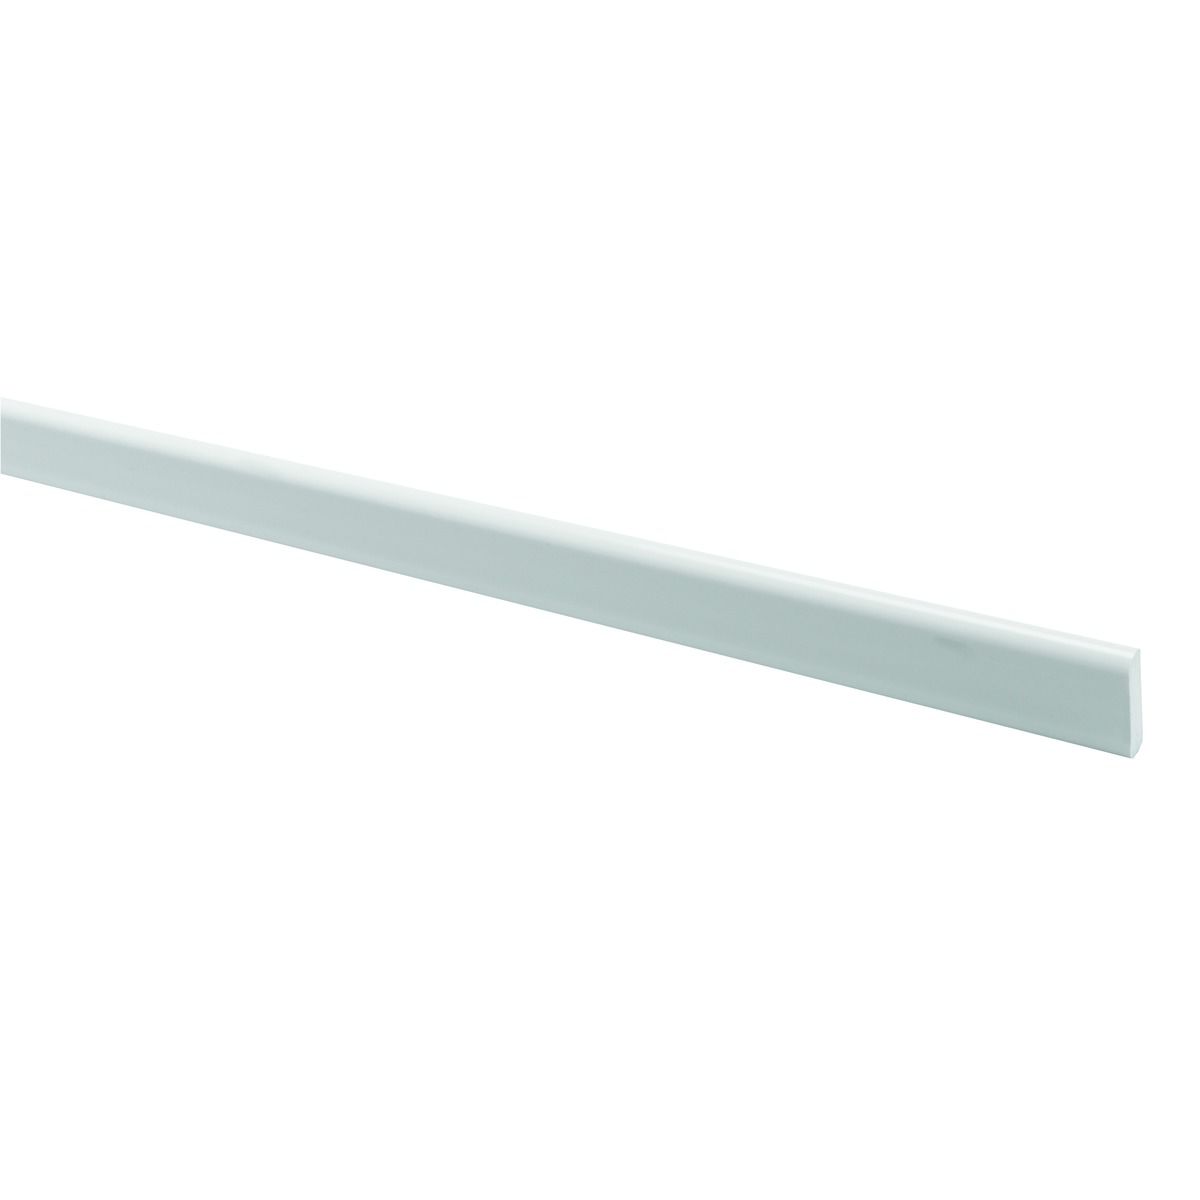 Image of Wickes PVCu White Cloaking Profile 65 x 2500mm